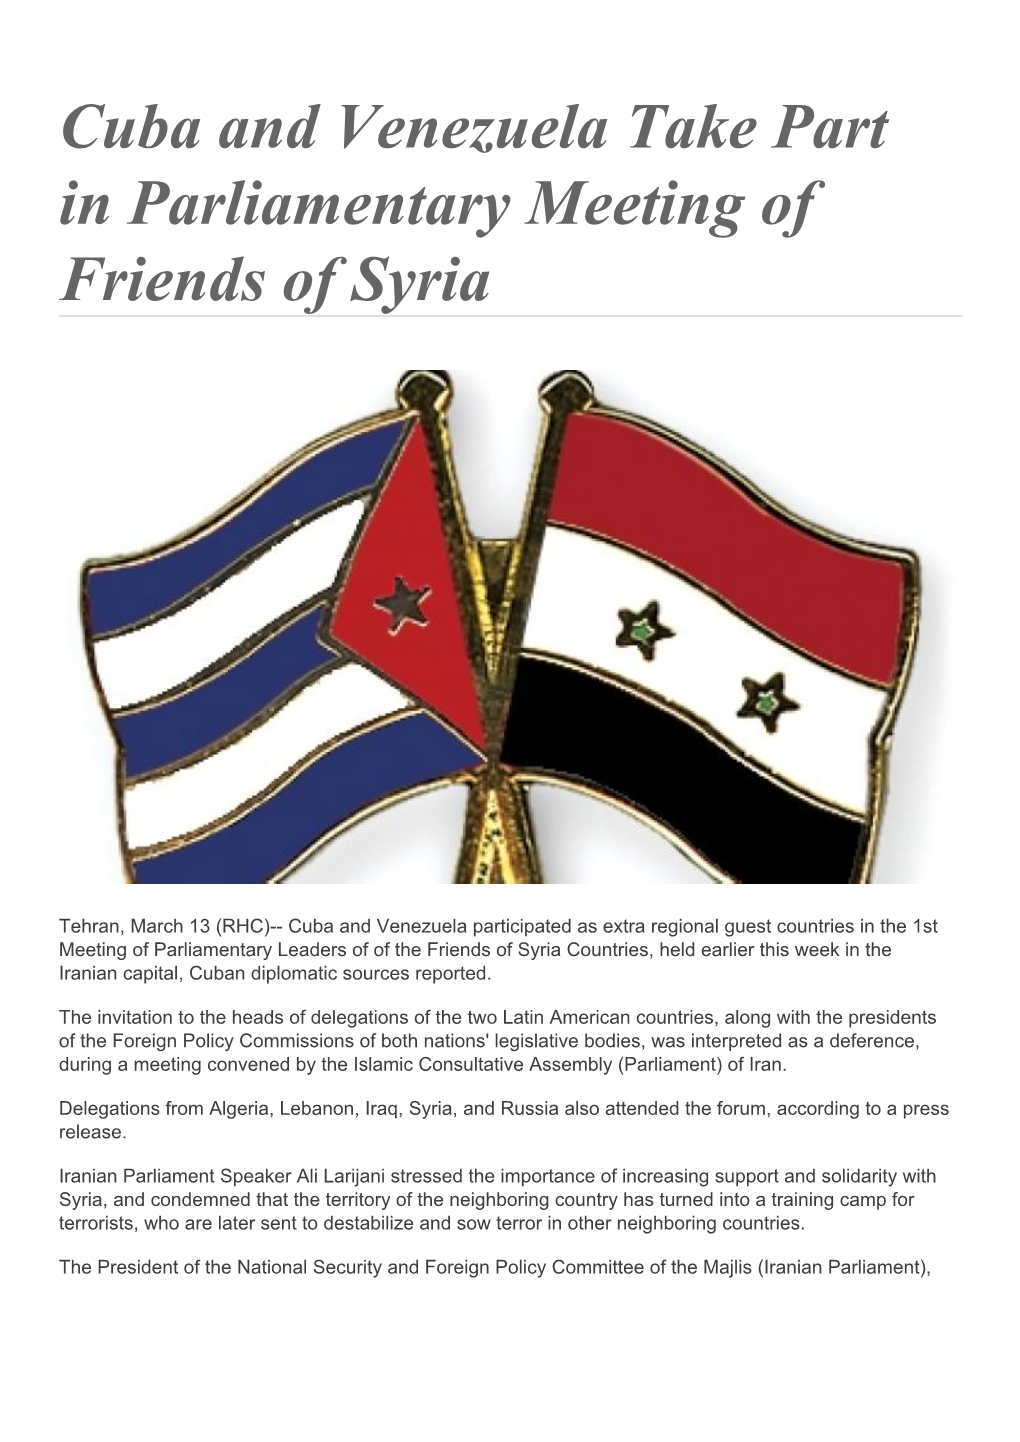 Cuba and Venezuela Take Part in Parliamentary Meeting of Friends of Syria